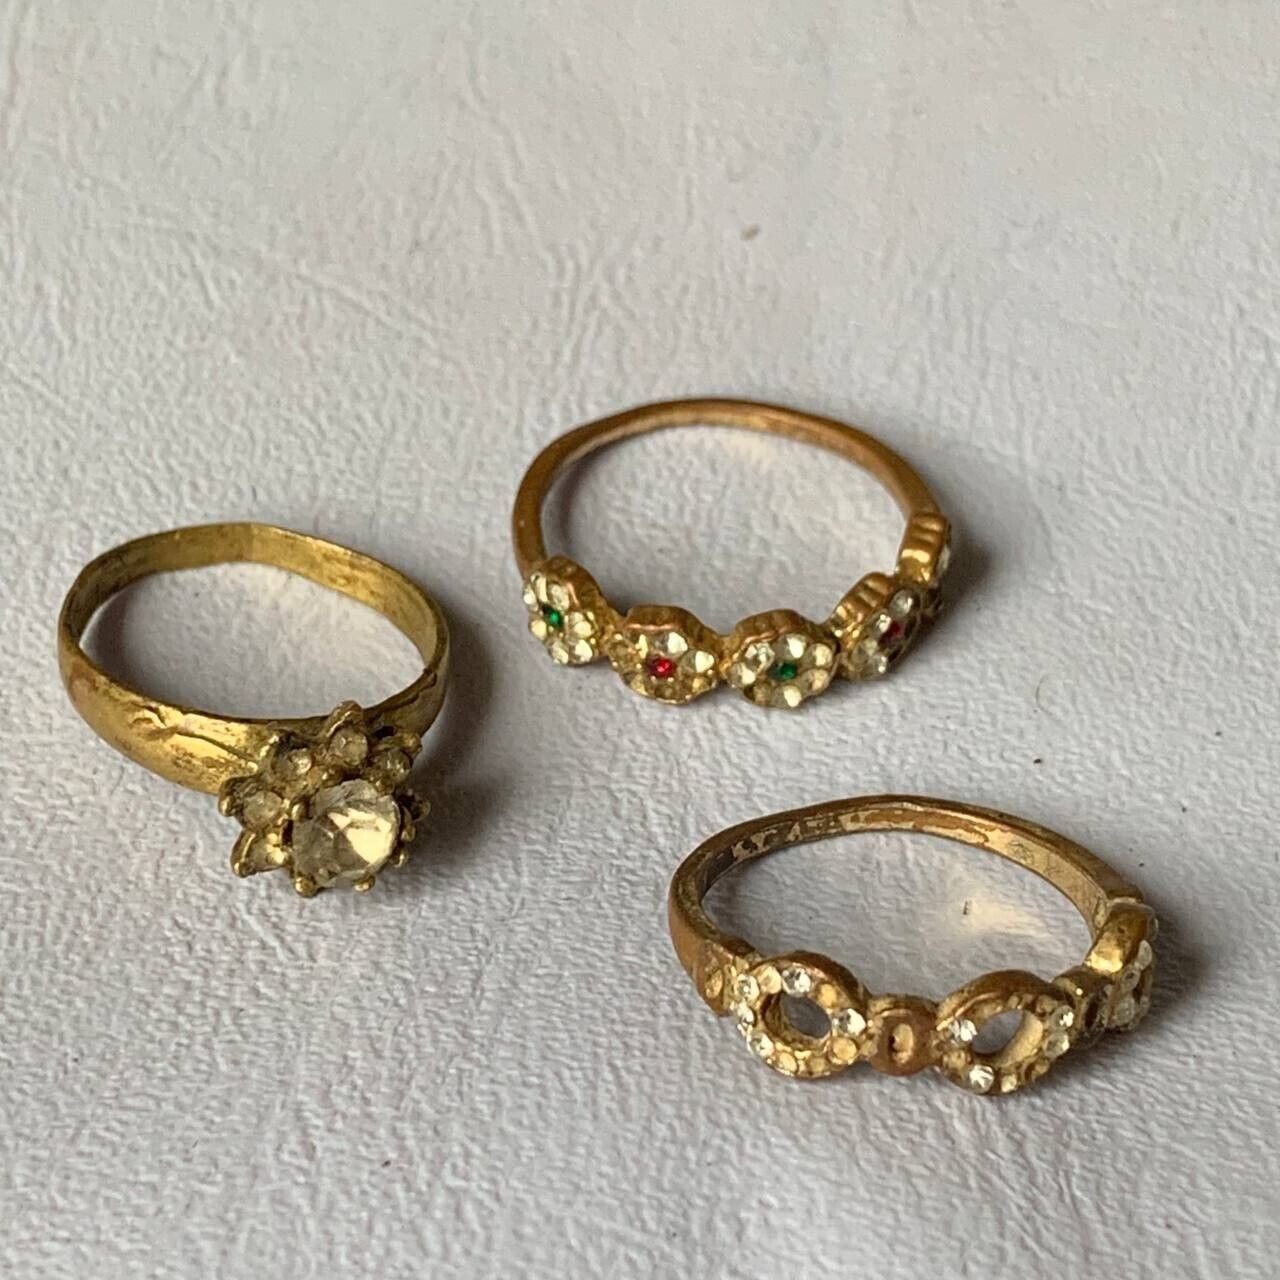 LOT OF ANTIQUE ANCIENT AMAZING BRONZE ROMAN STYLE RINGS WEDDING OLD ARTIFACT